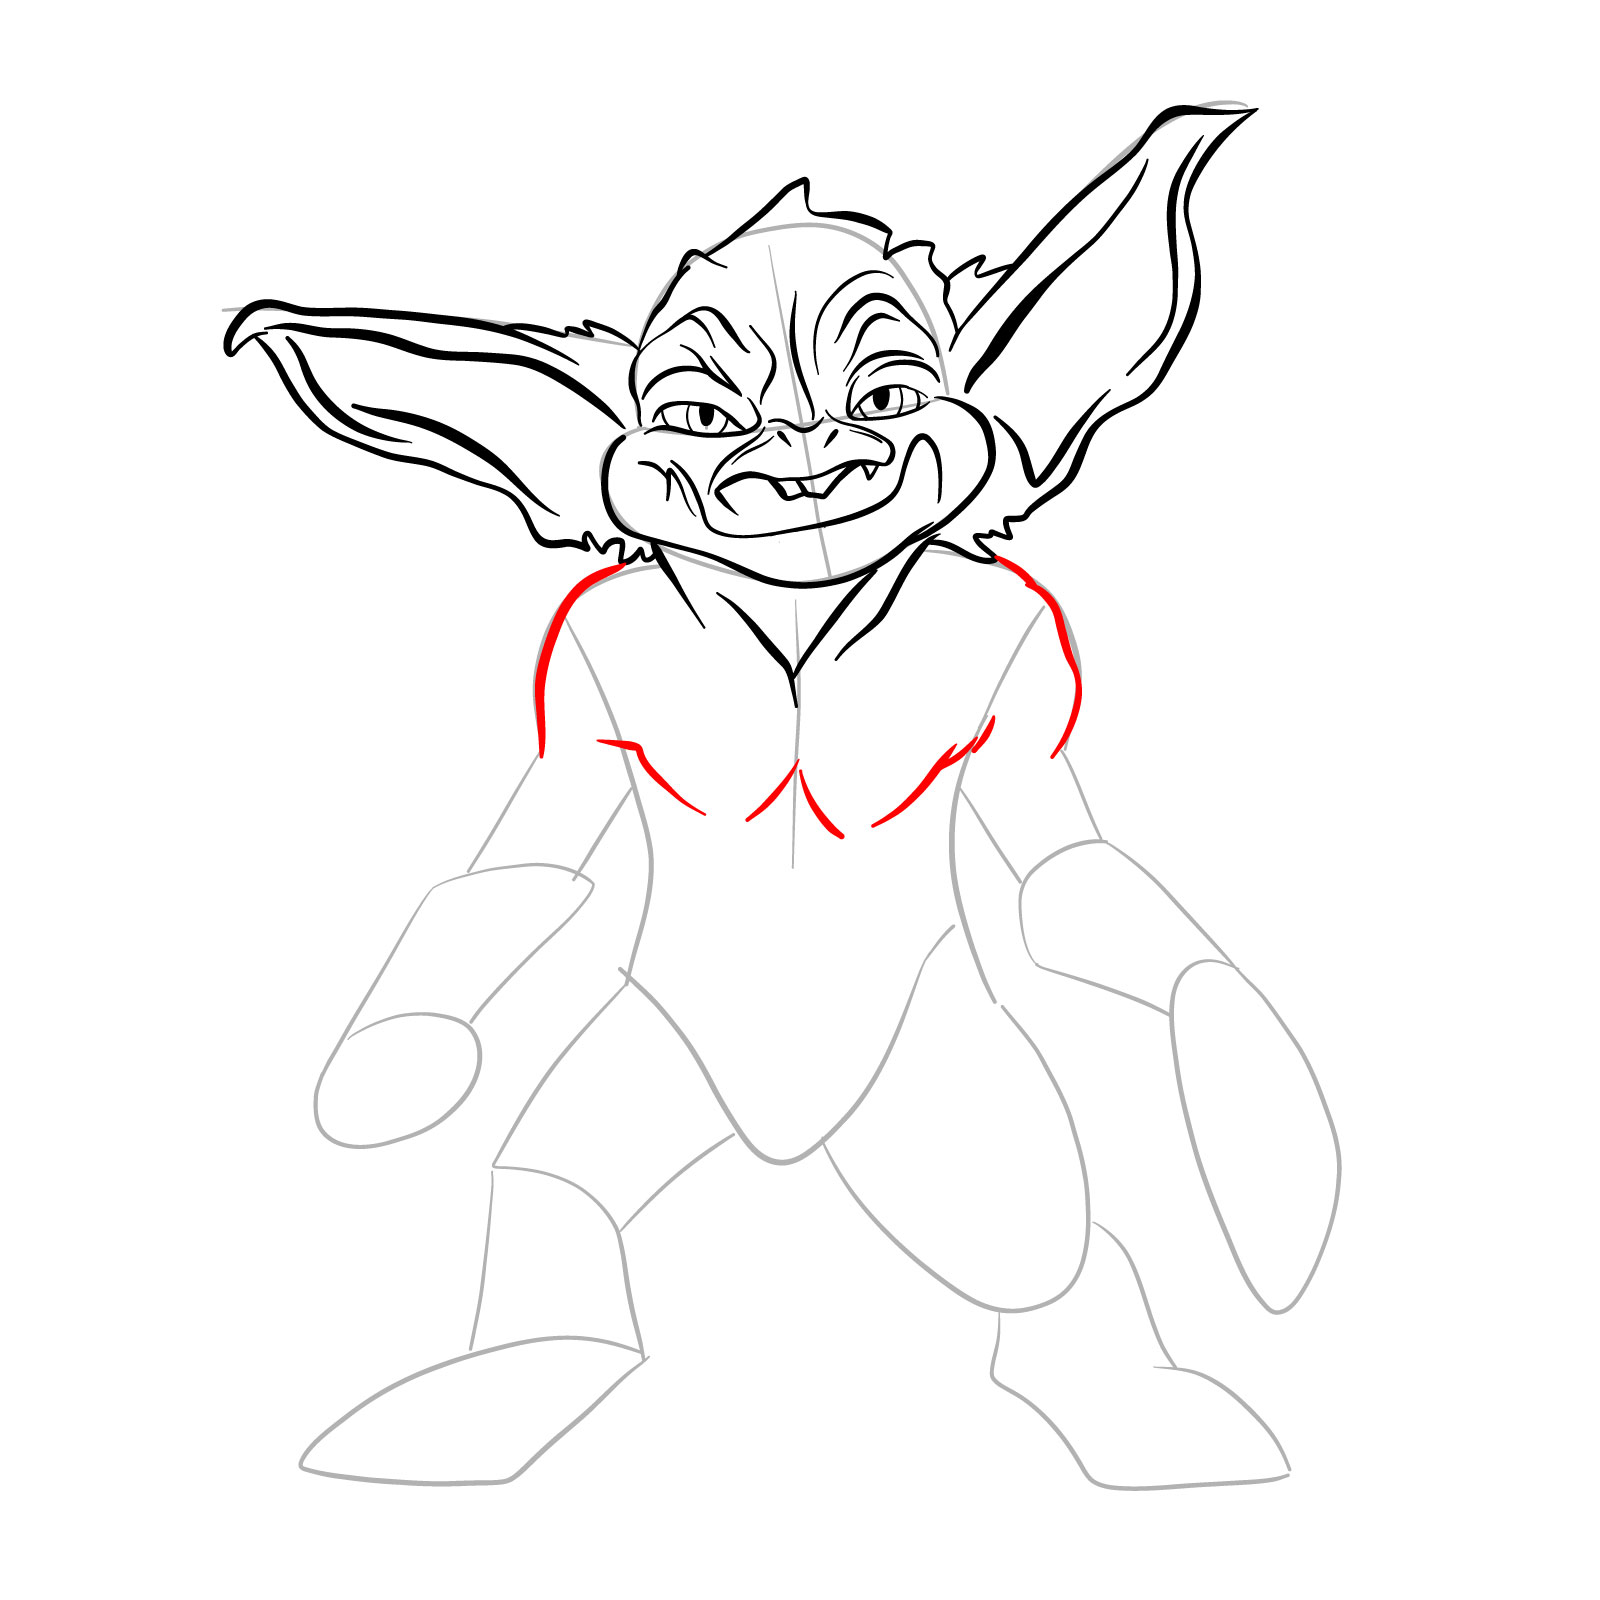 How to draw a Goblin - step 16